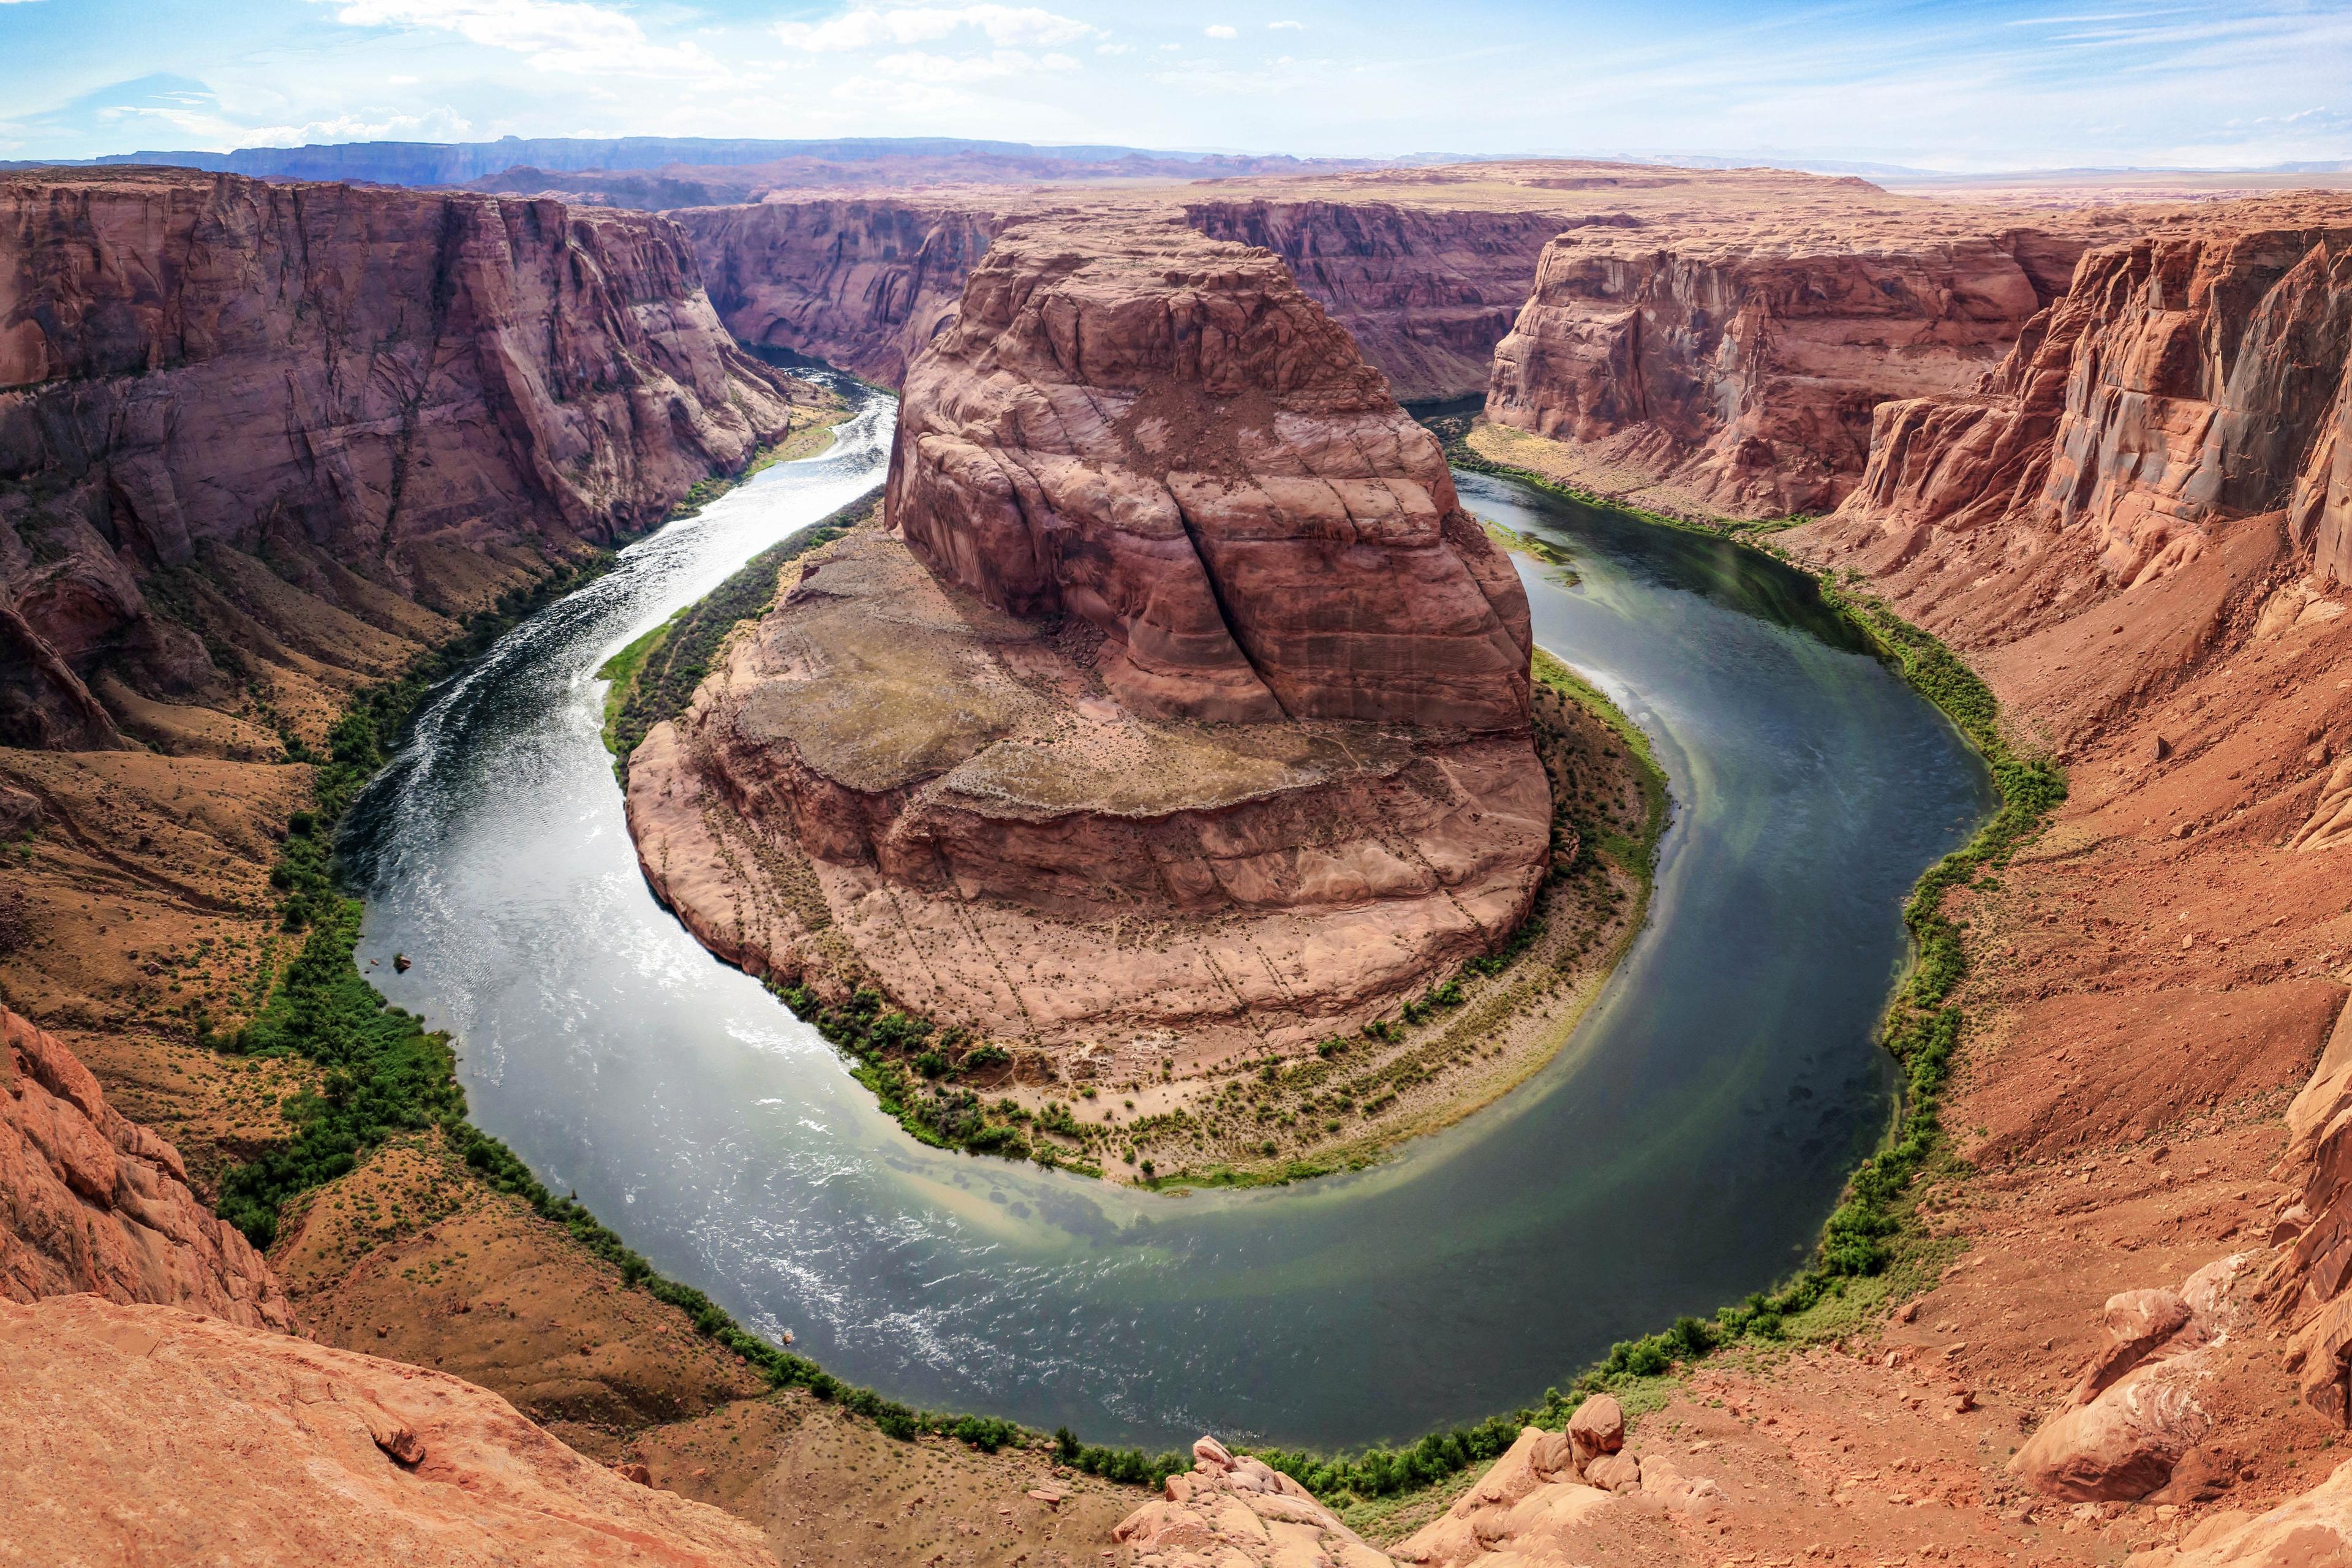 The Horseshoe Bend is part of the Eastern section of the Grand Canyon